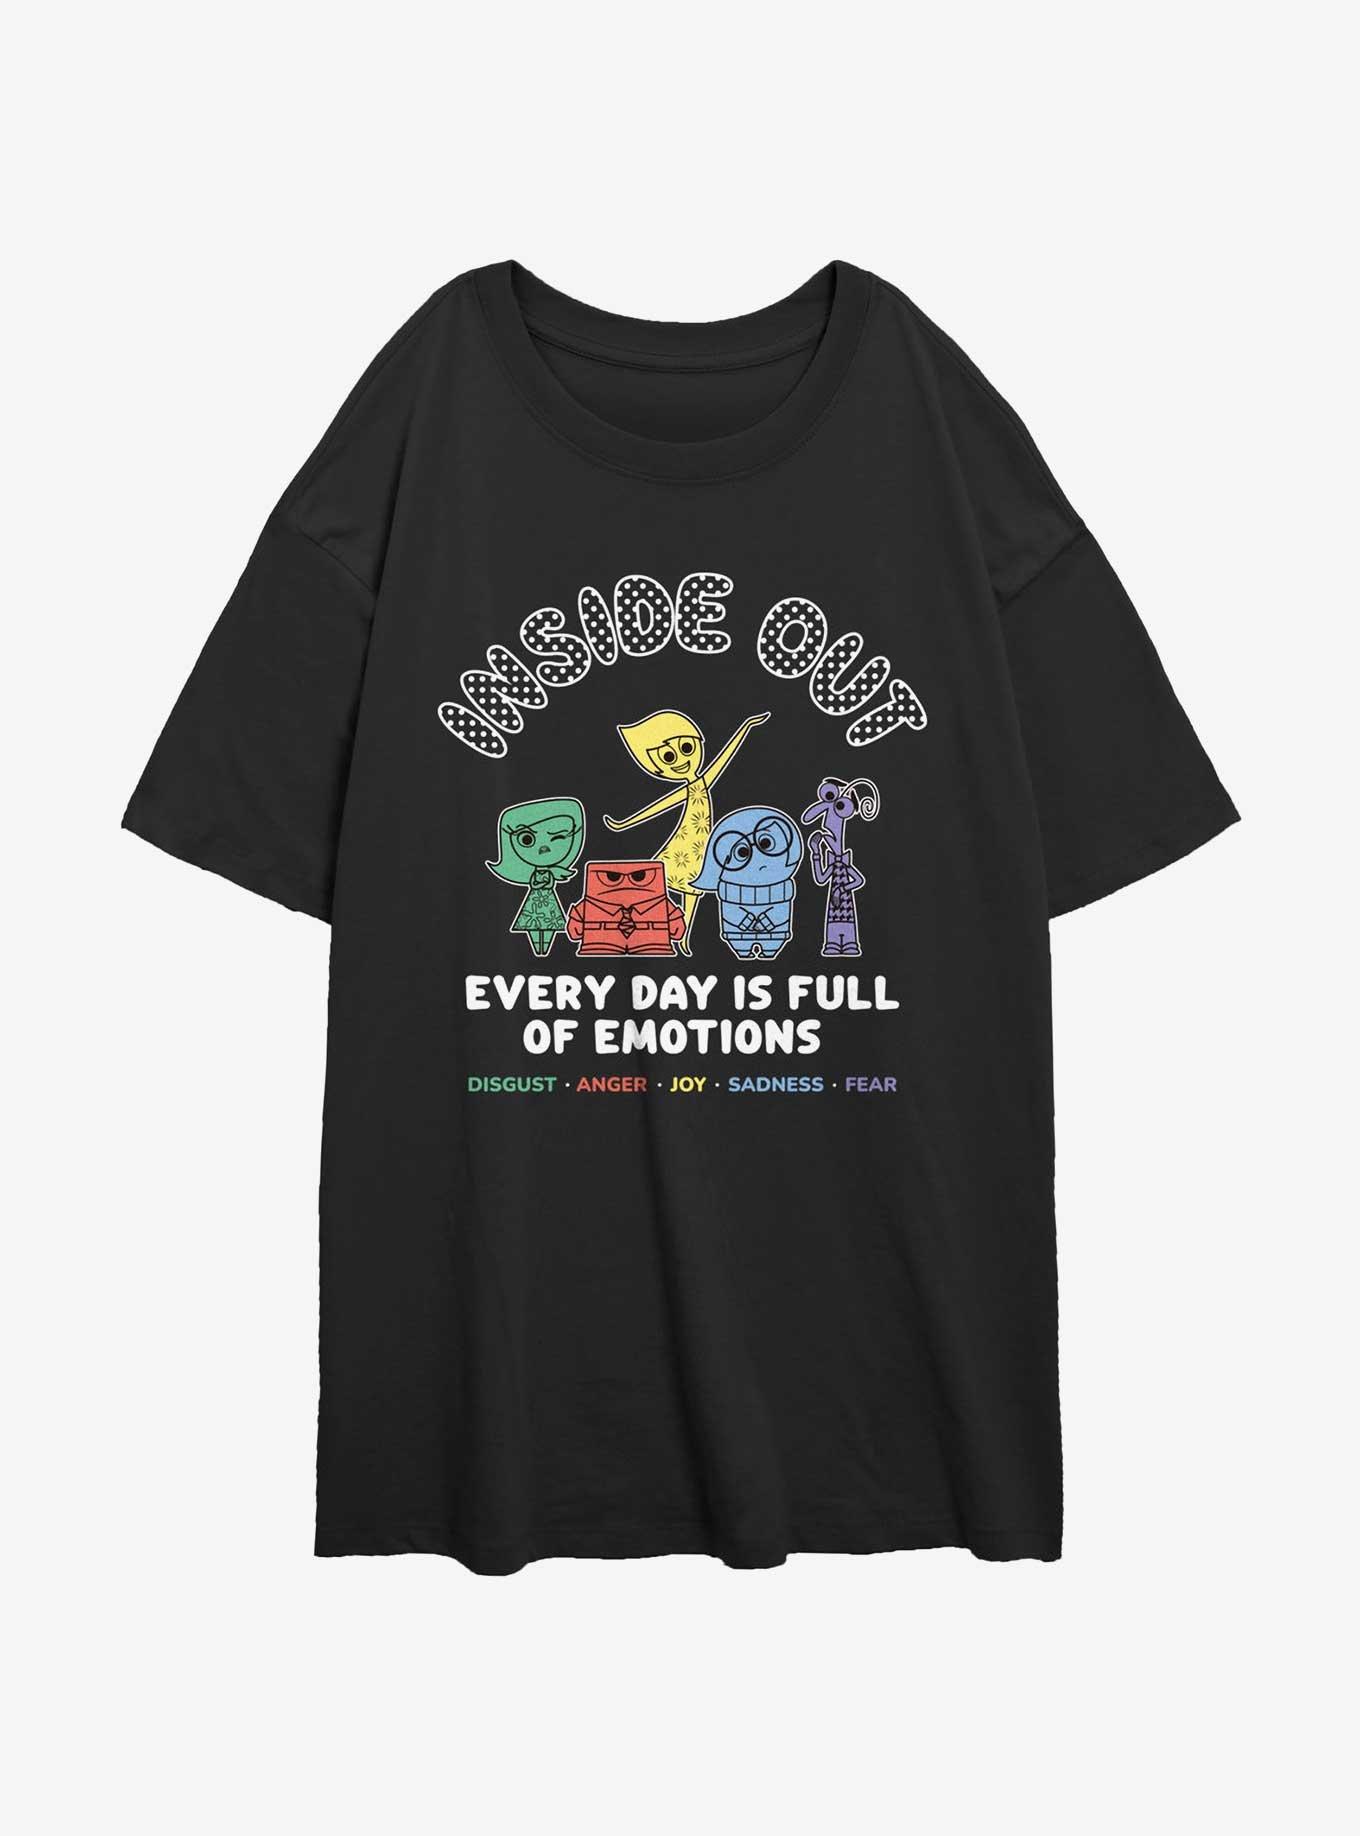 Disney Pixar Inside Out 2 Every Day Emotions Womens Oversized T-Shirt, BLACK, hi-res